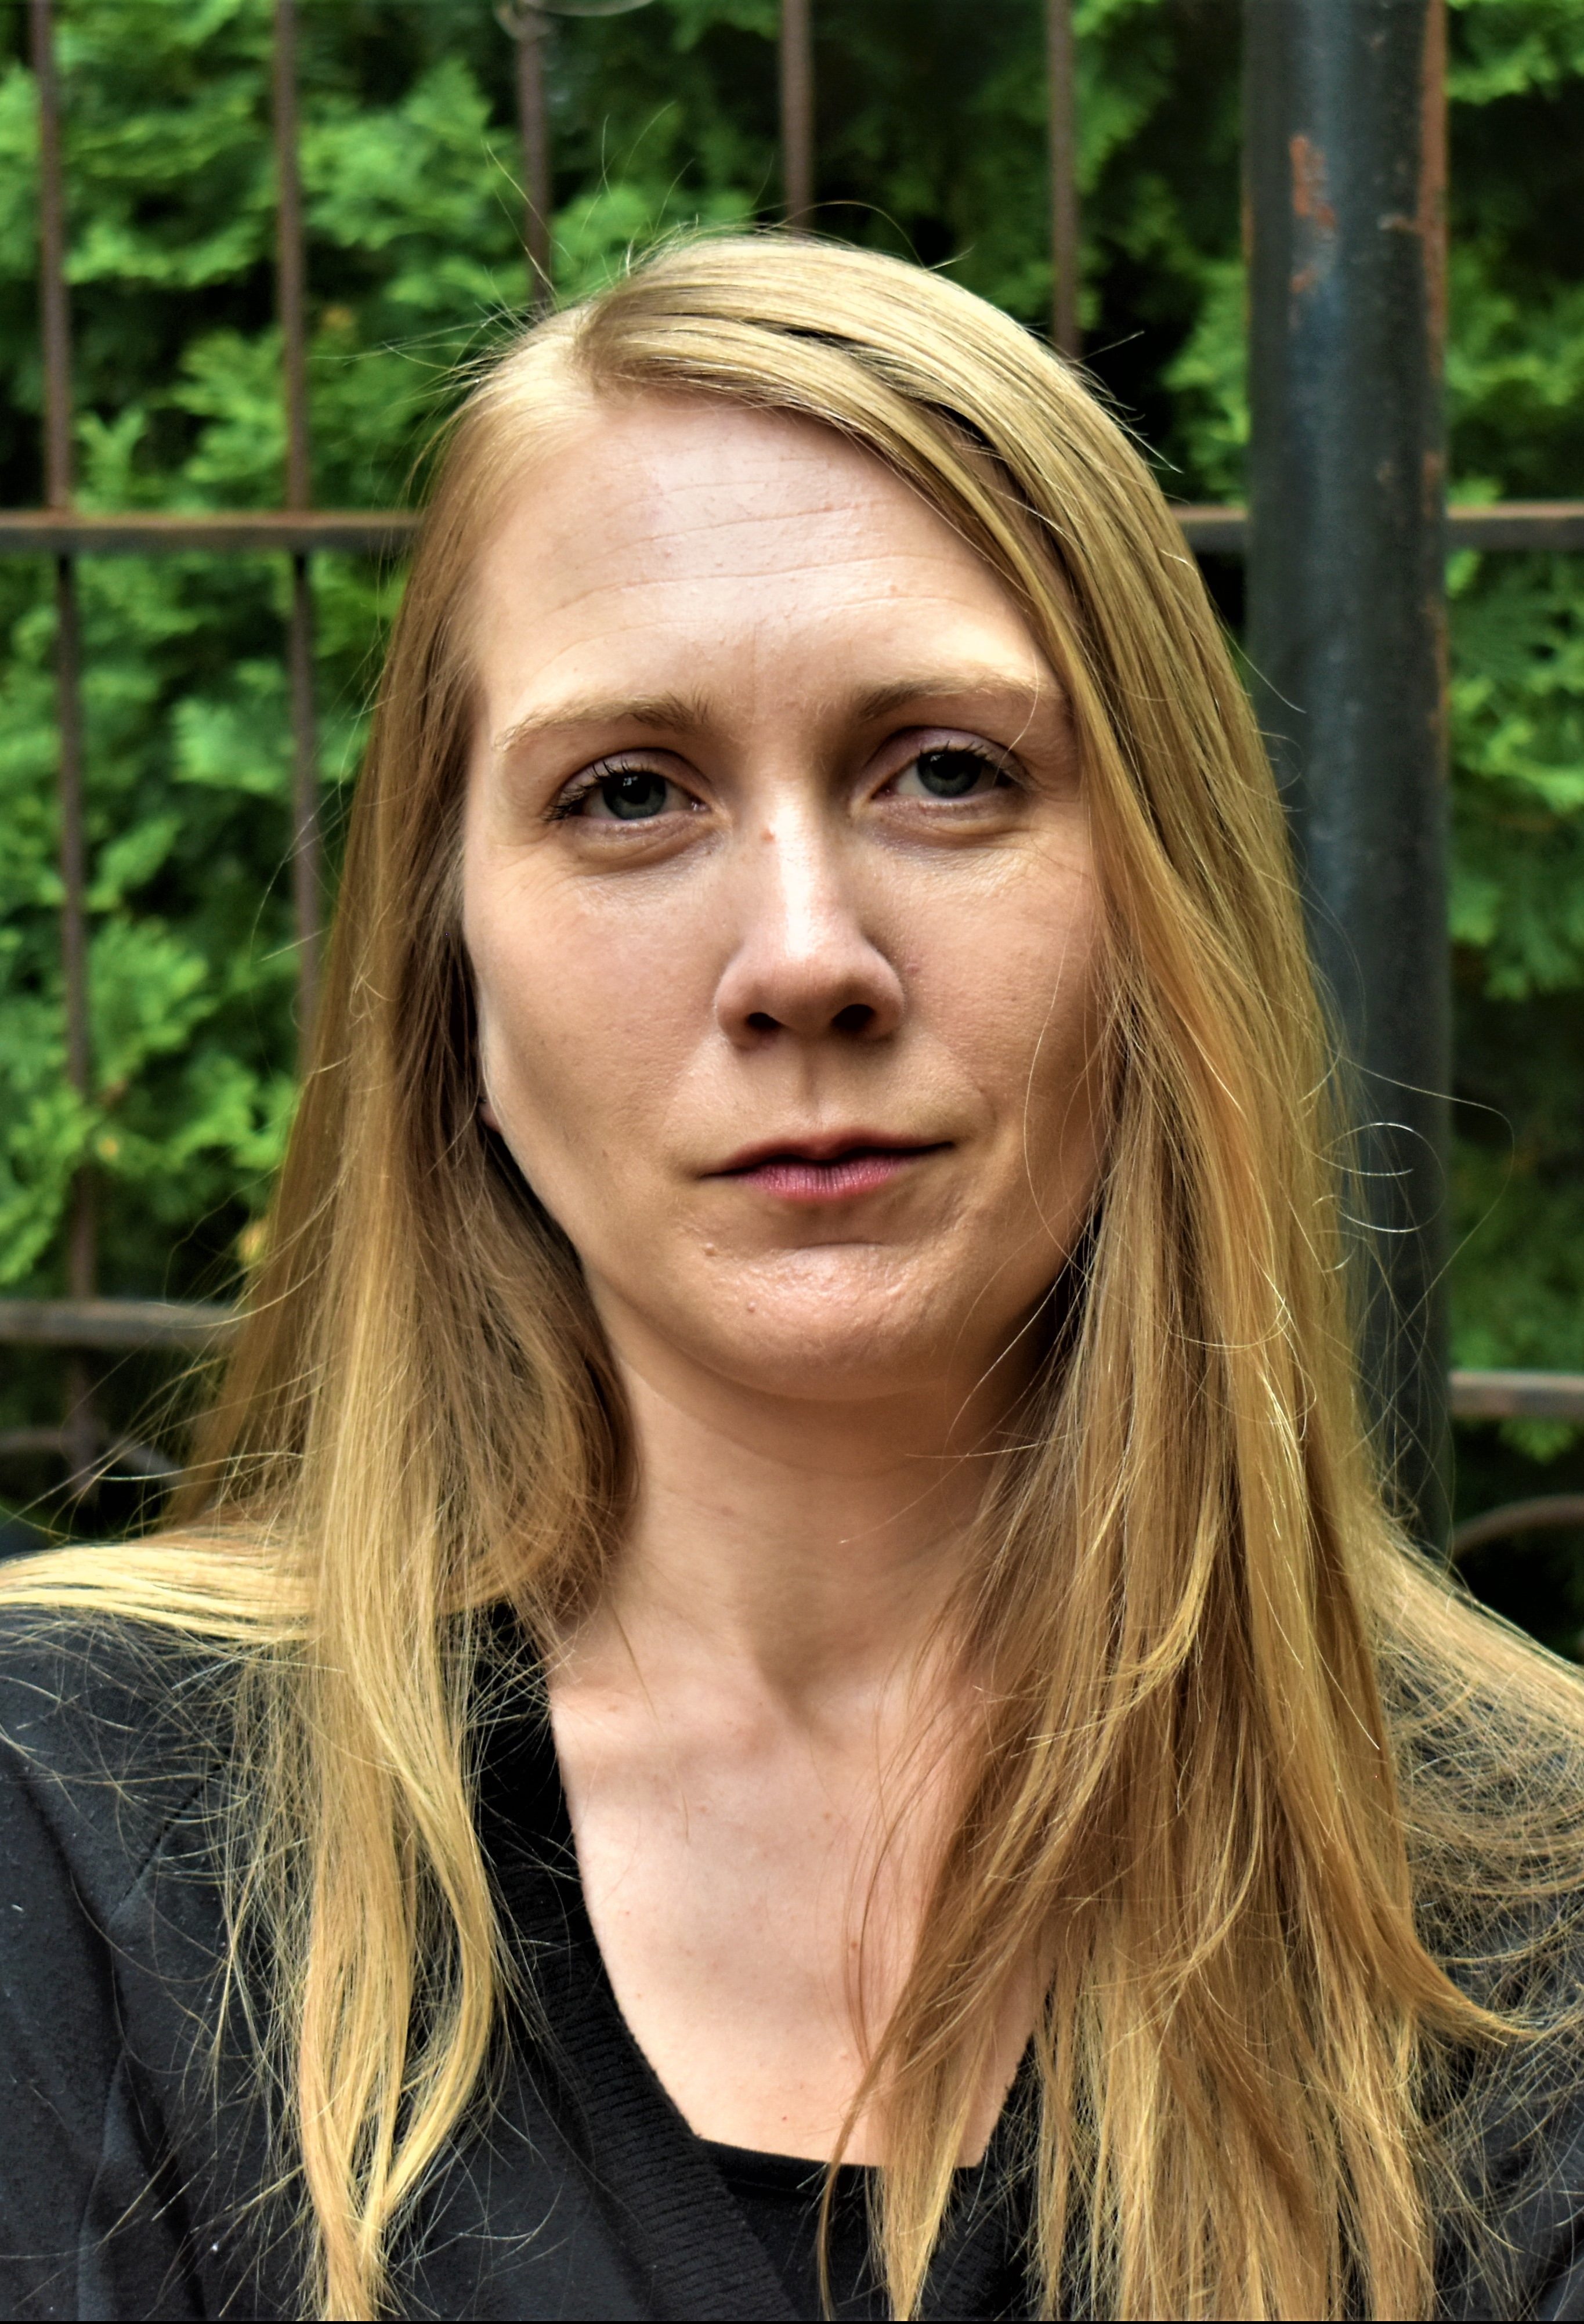 An Interview with Claire Wahmanholm